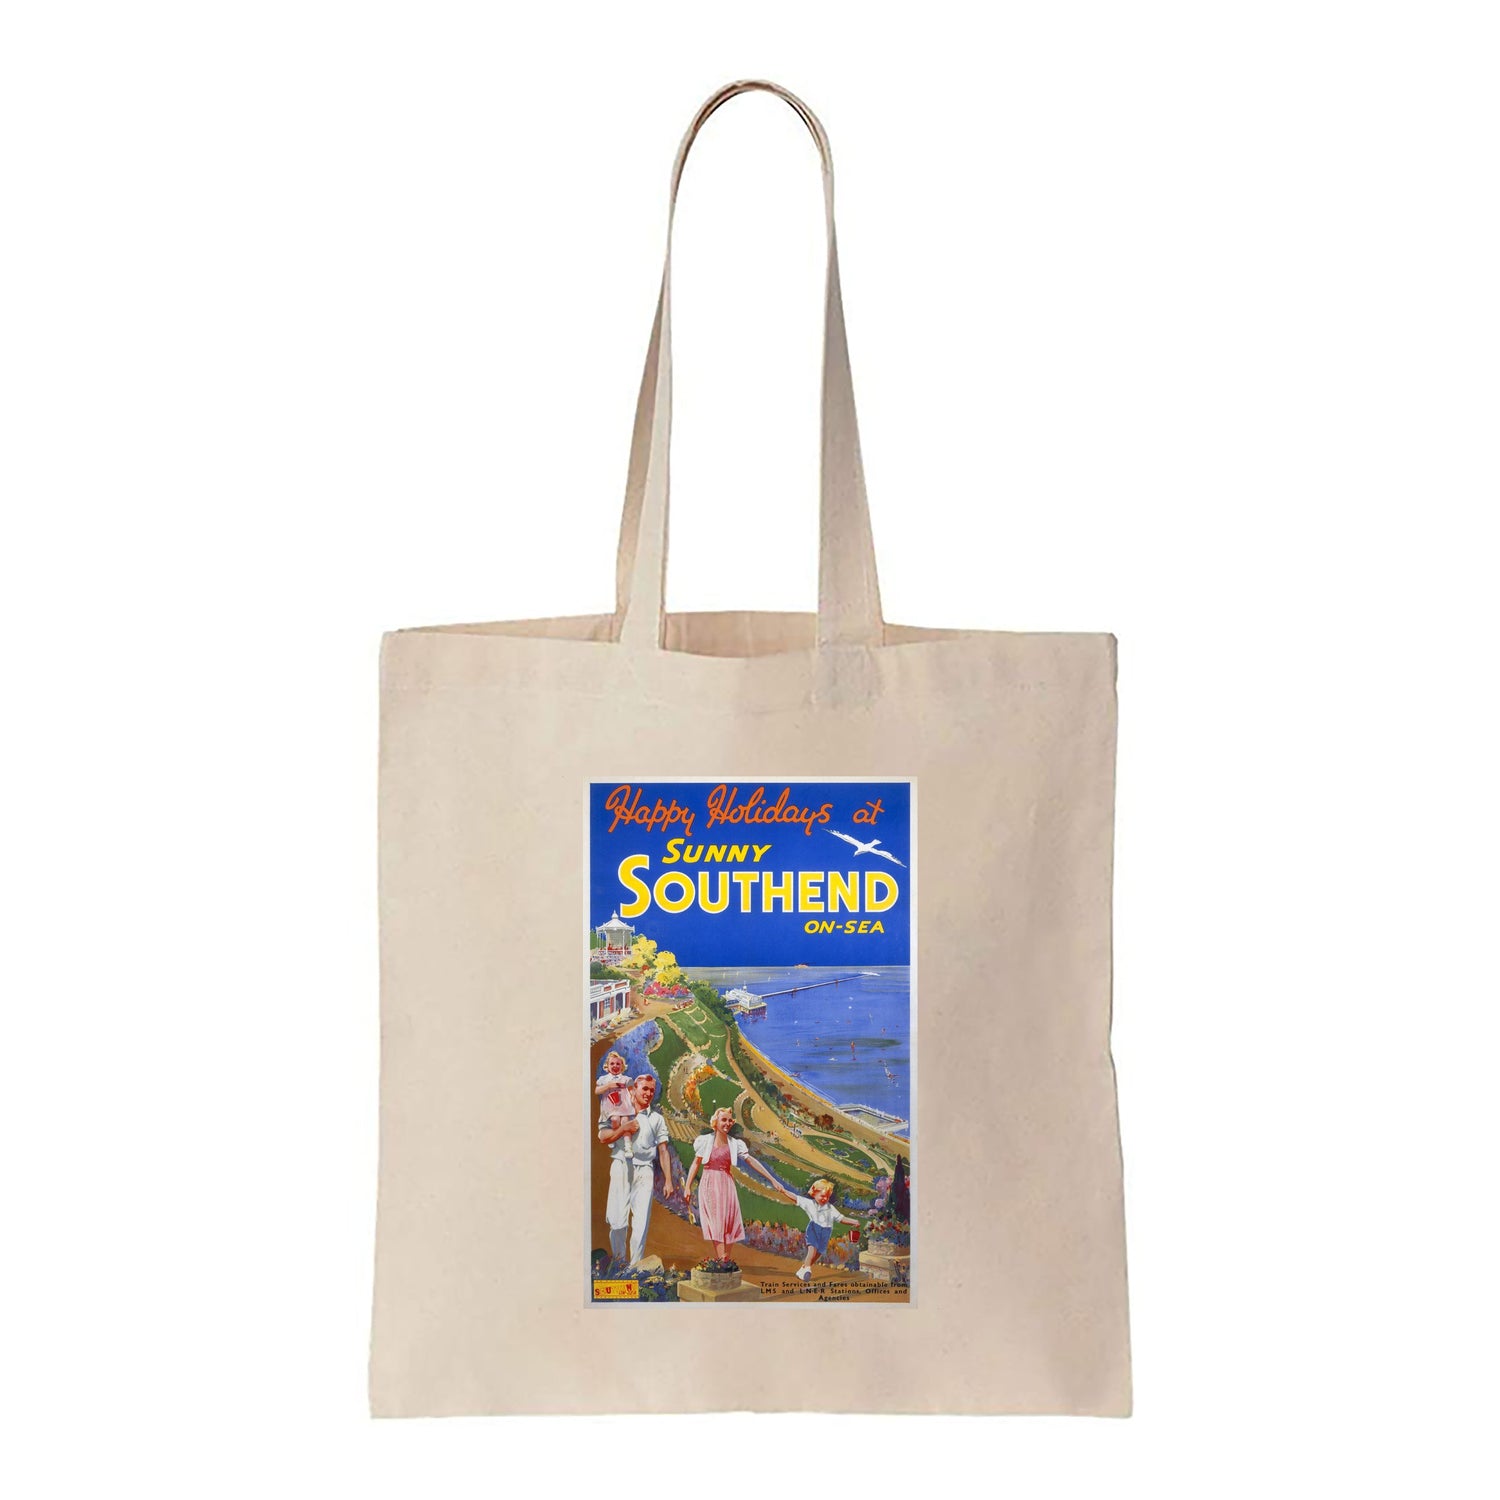 Happy Holidays at sunny Southend-on-sea - Canvas Tote Bag